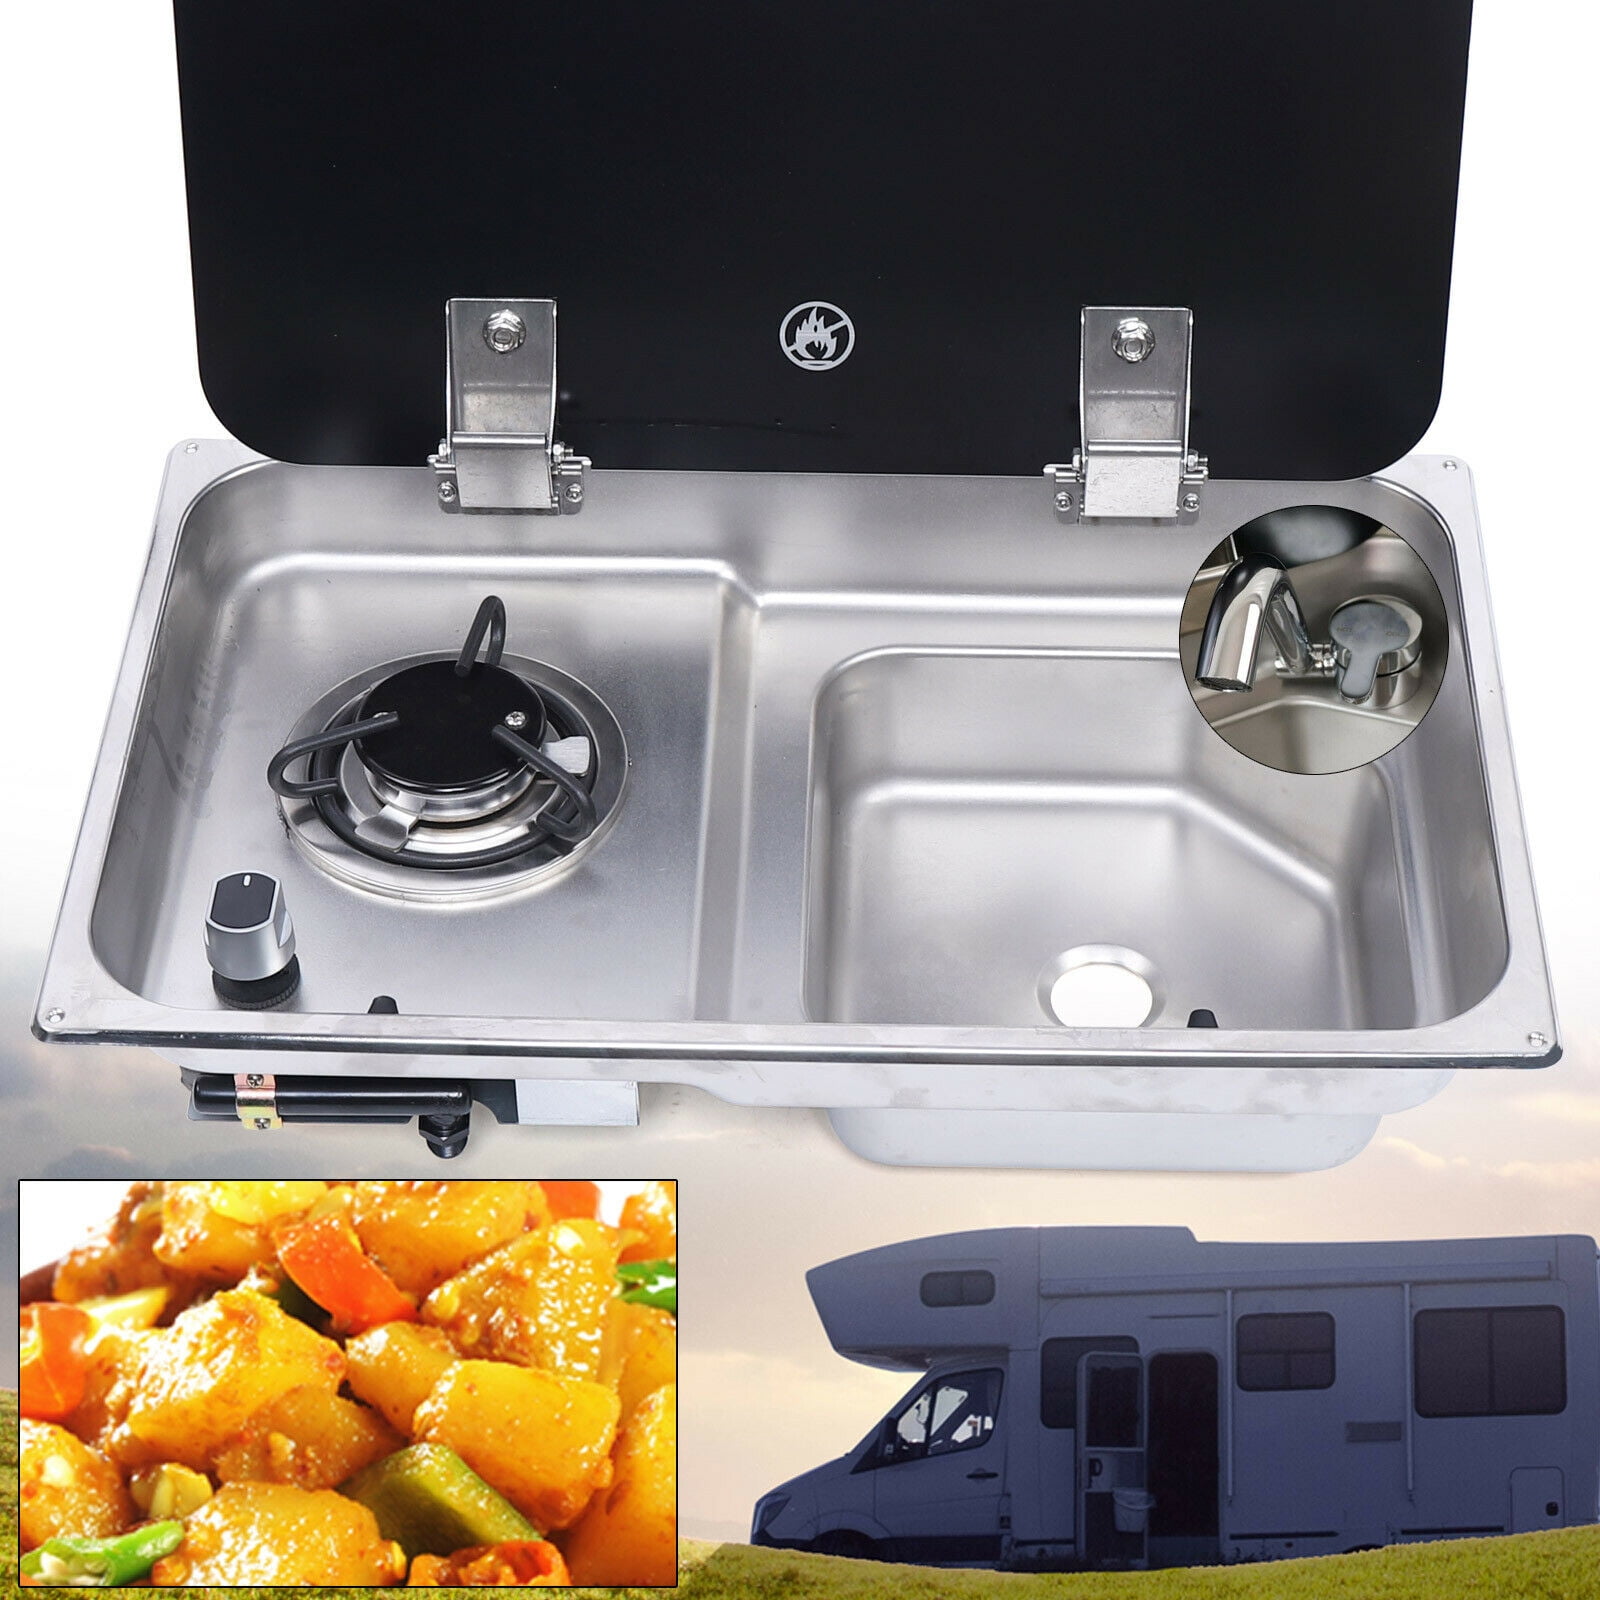 Boat RV Camper 2 Burners Gas Stove Hob with Sink Combo W/ Glass Lid Faucet